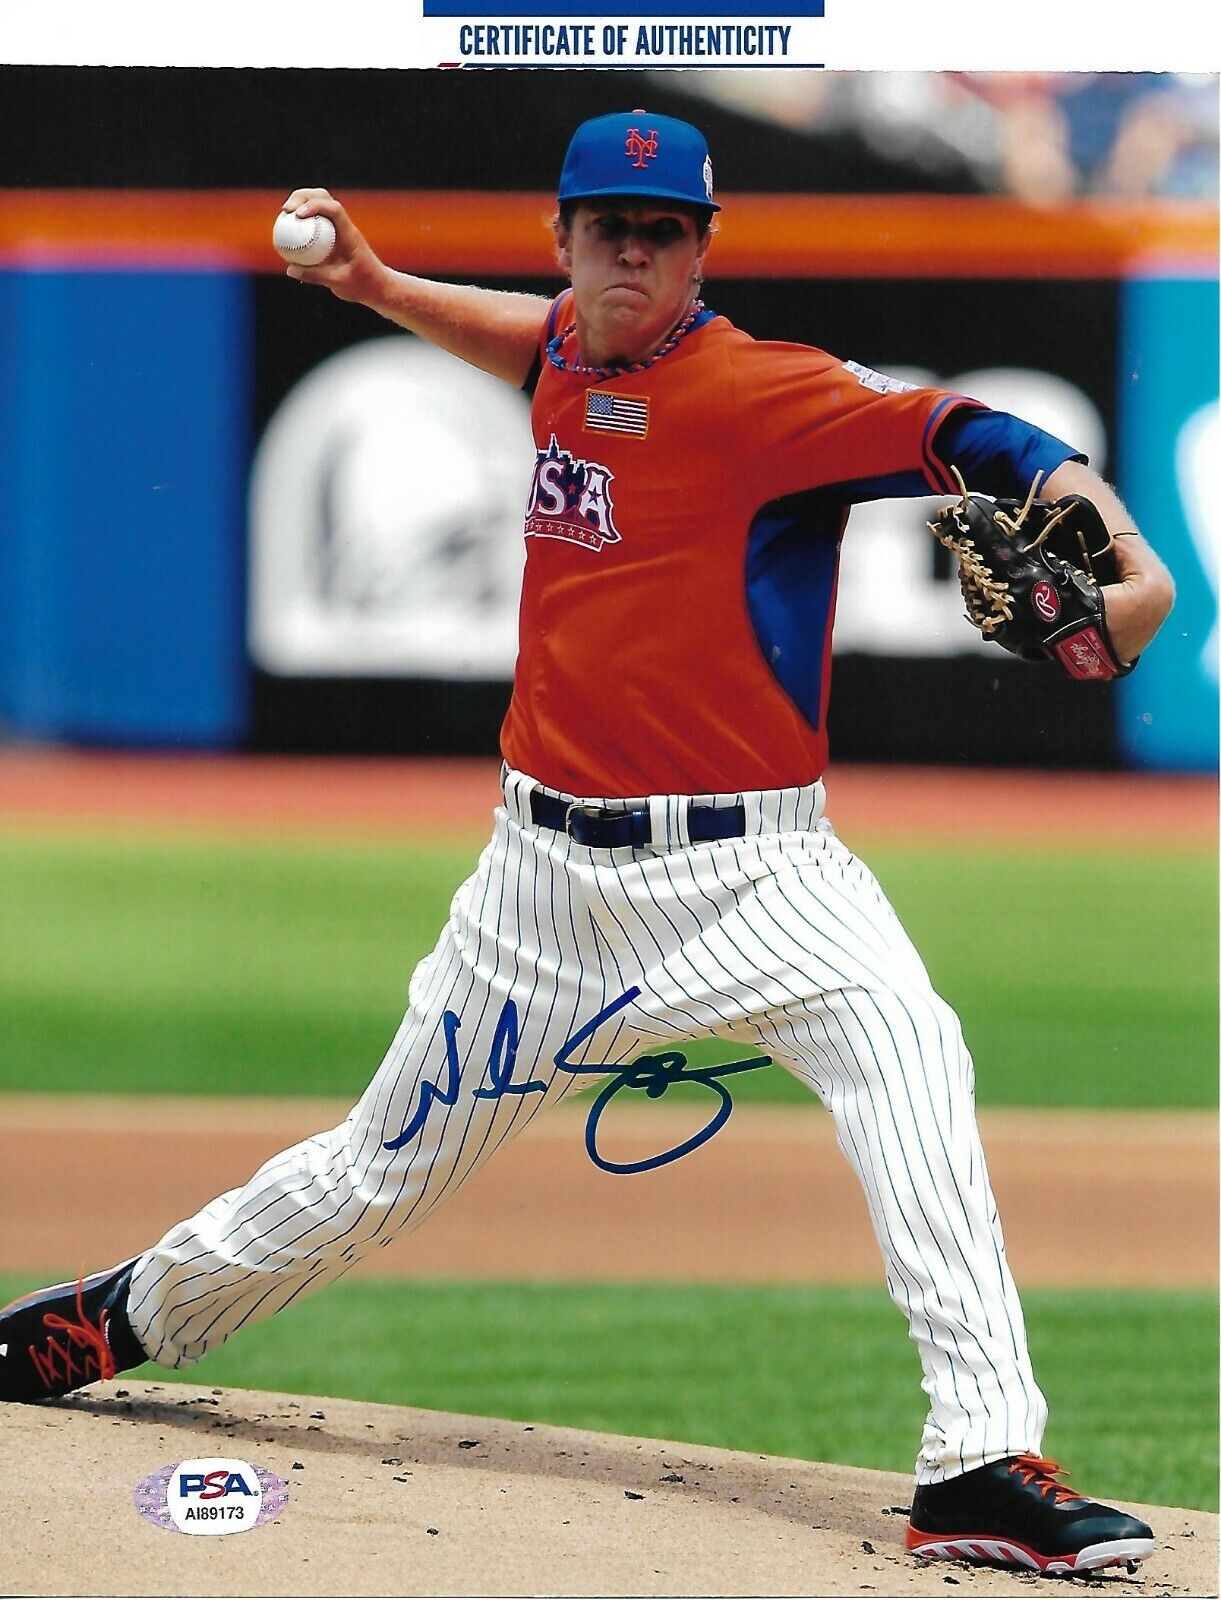 NOAH SYNDERGAARD signed autographed NEW YORK METS 8X10 Photo Poster painting COA PSA AI89173